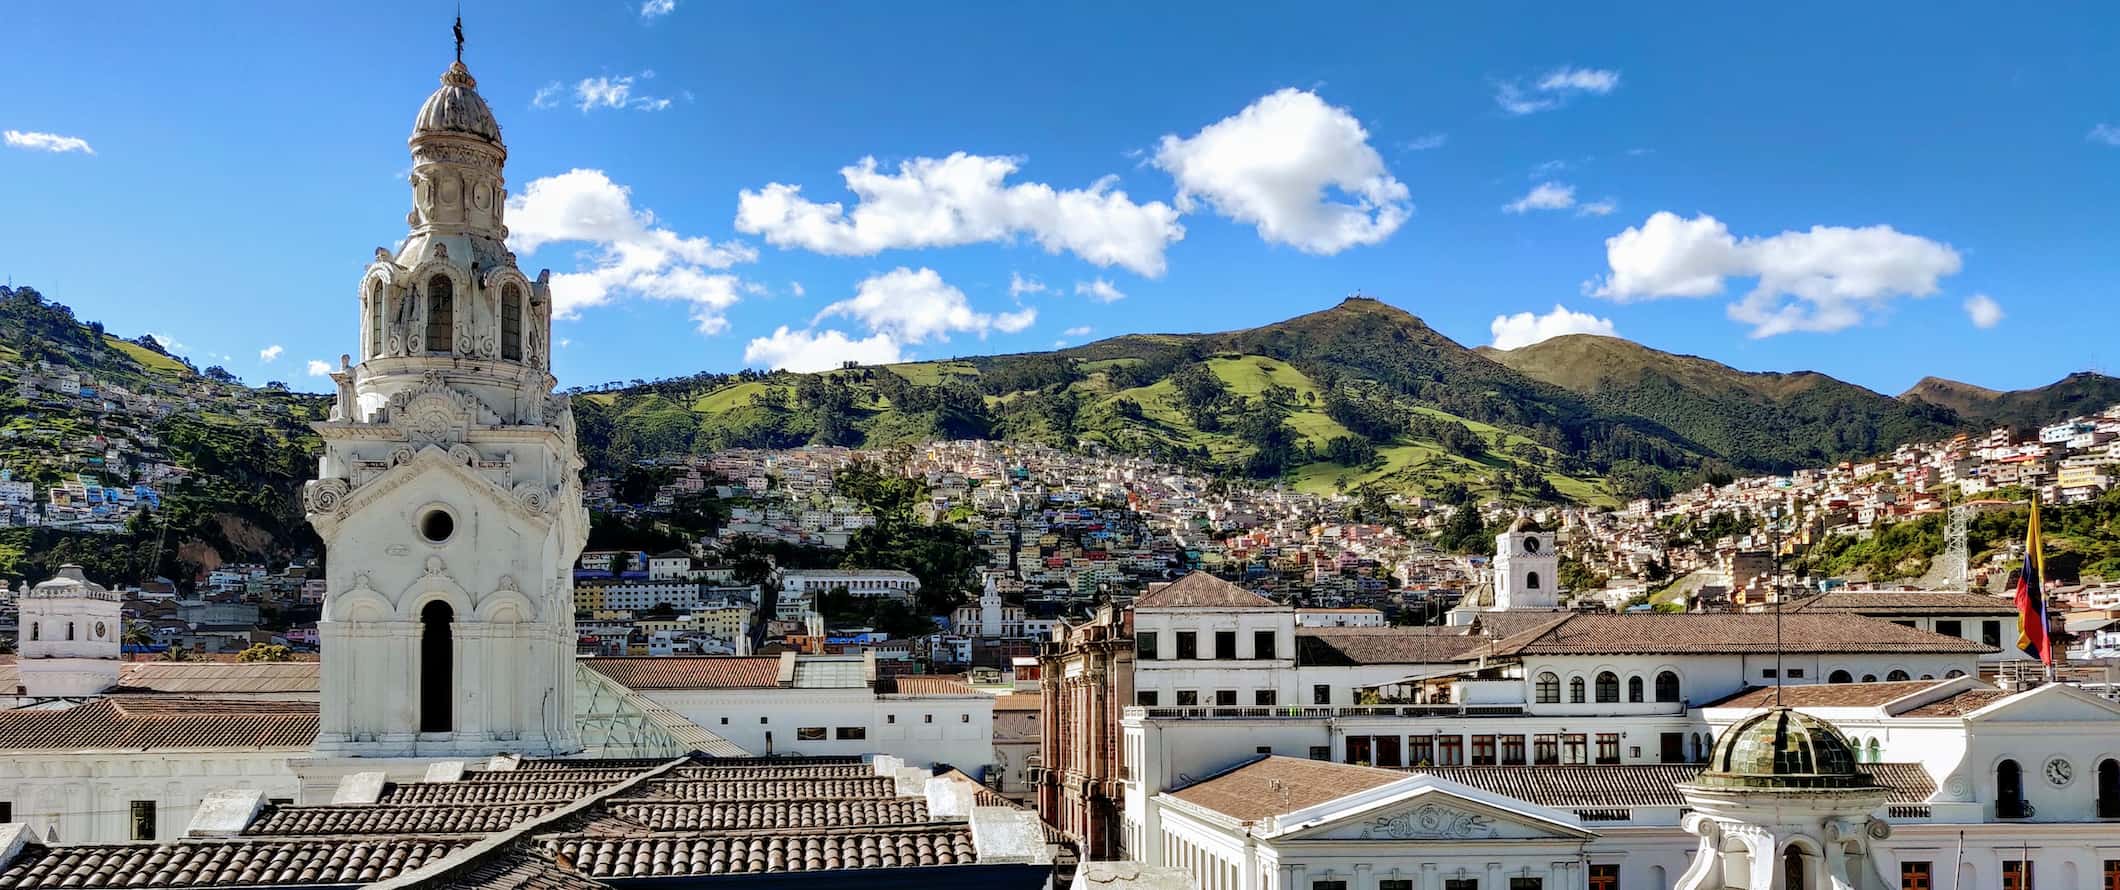 The historic buildings of the Old Town in Quito, Ecuador